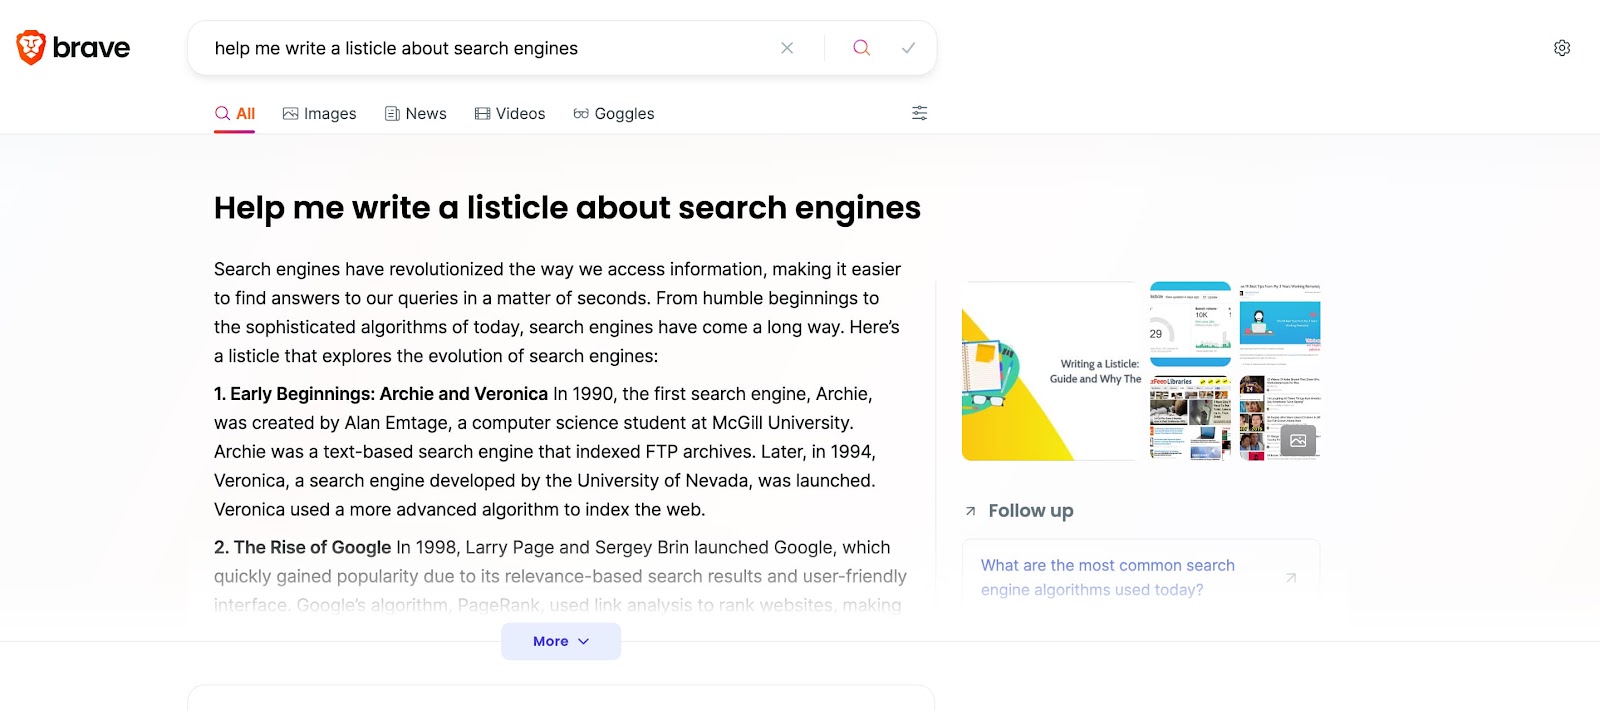 Brave Search results page for “help me write a listicle about search engines.”